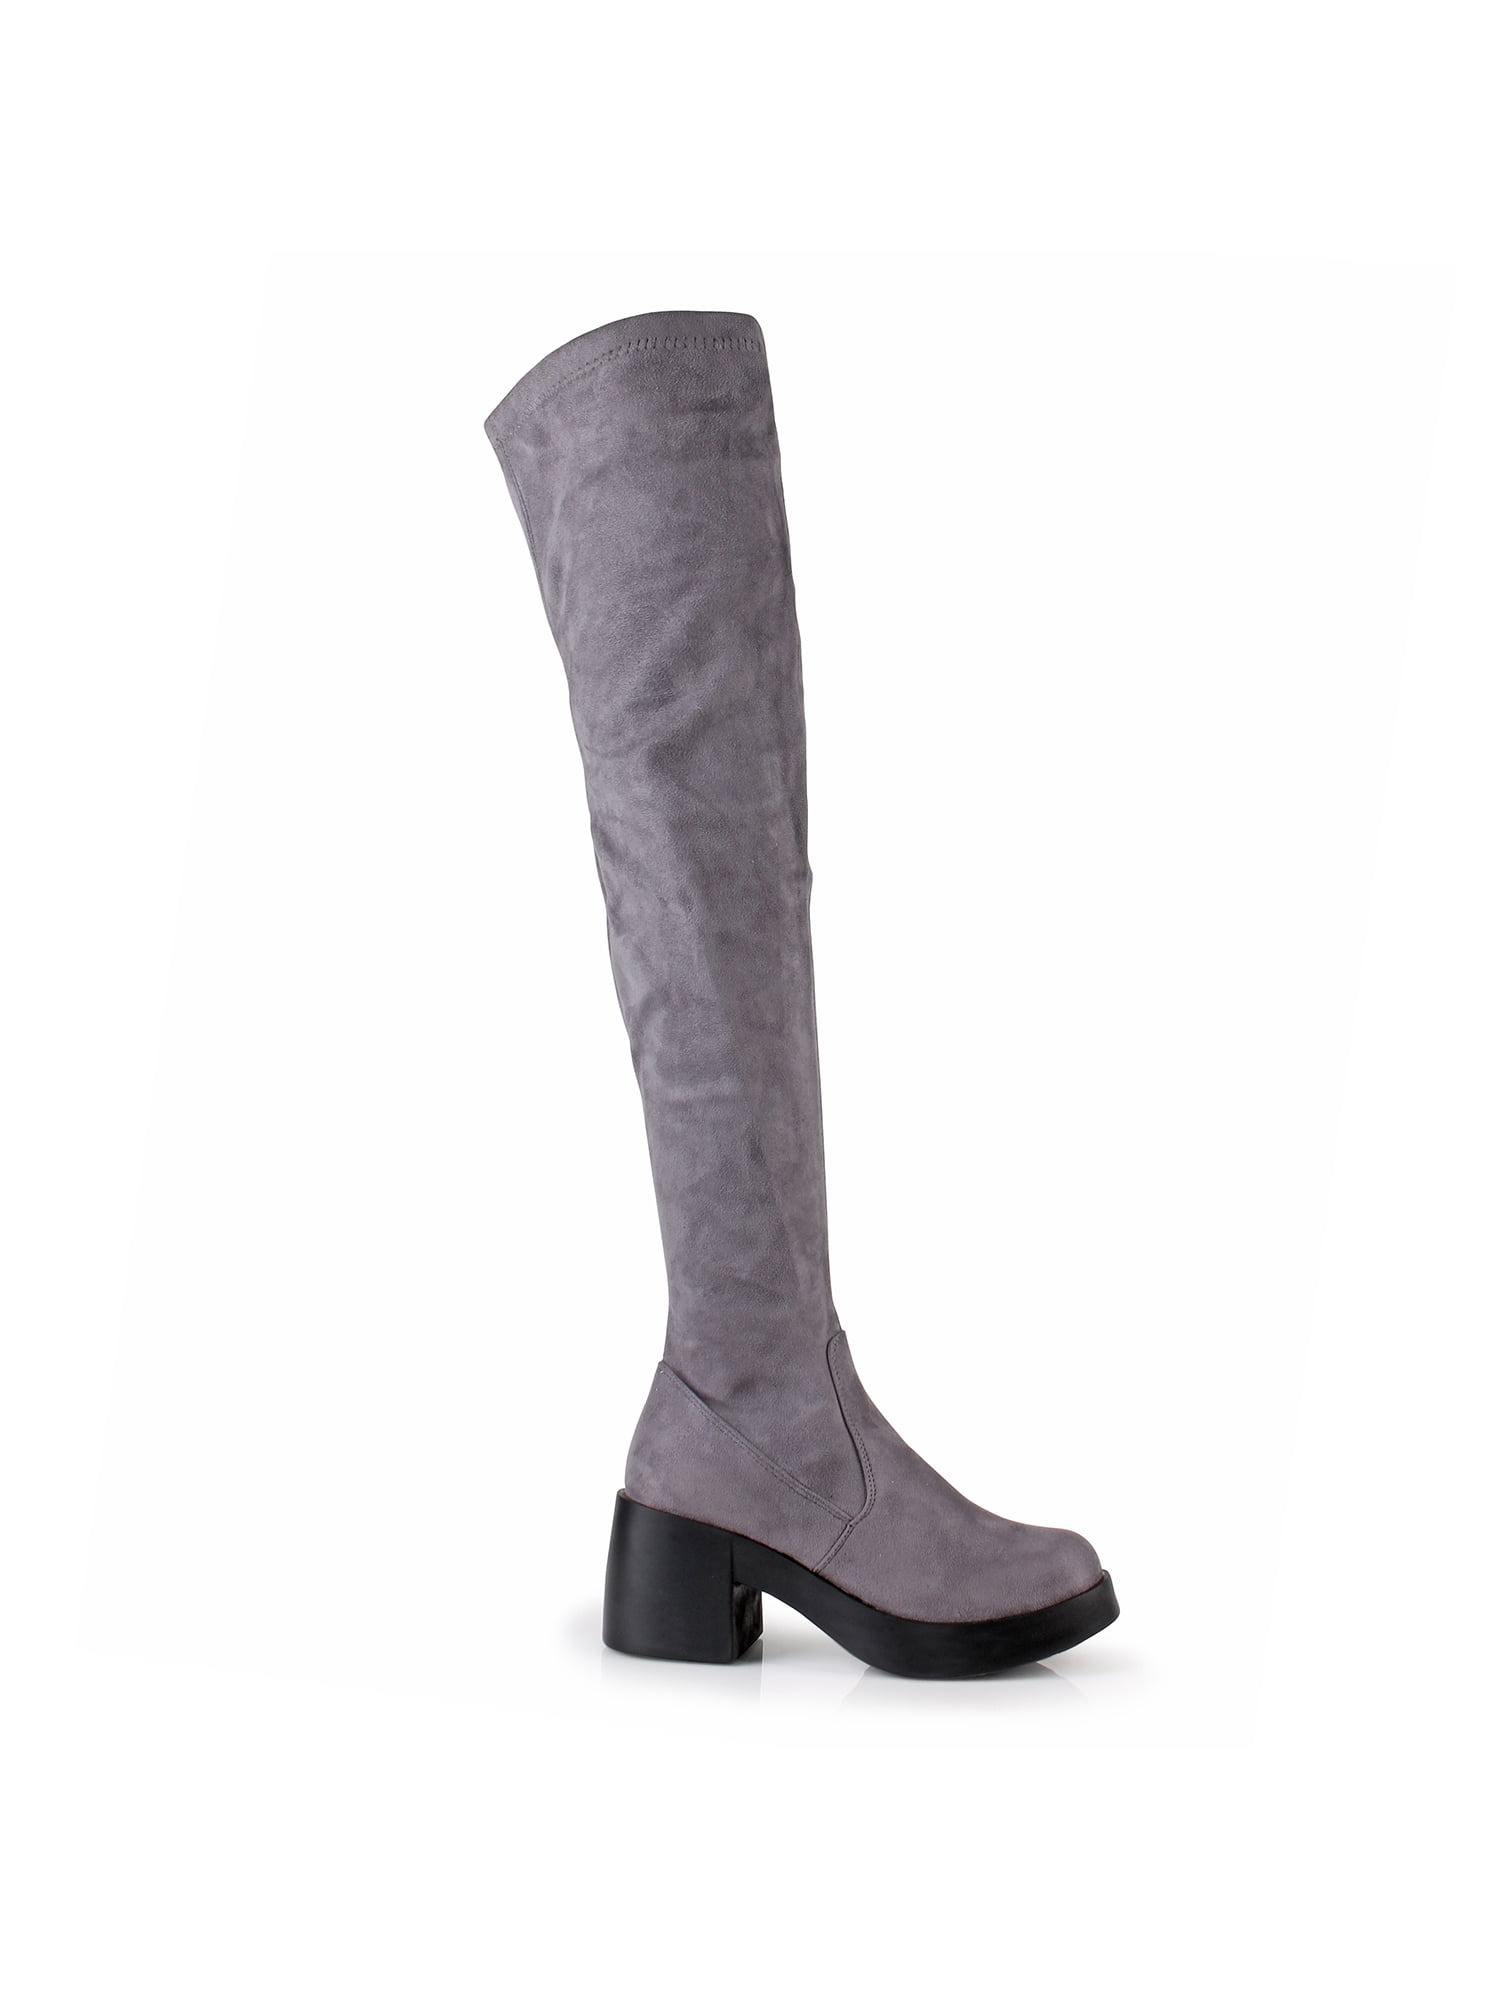 WOMENS OVER THE KNEE THIGH HIGH CHUNKY PLATFORM HEEL STRETCH GRAY NEW* 